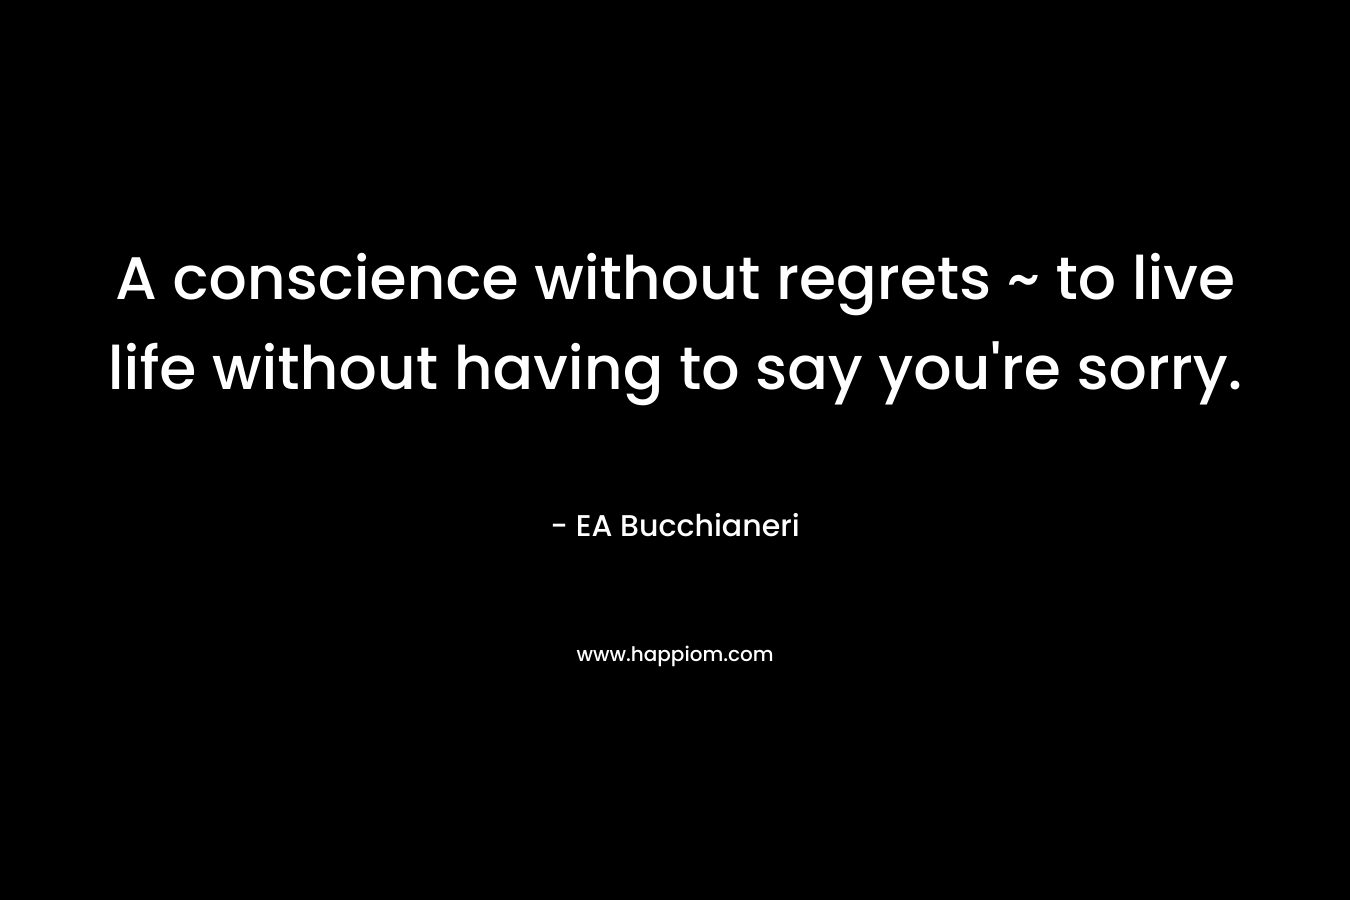 A conscience without regrets ~ to live life without having to say you're sorry.